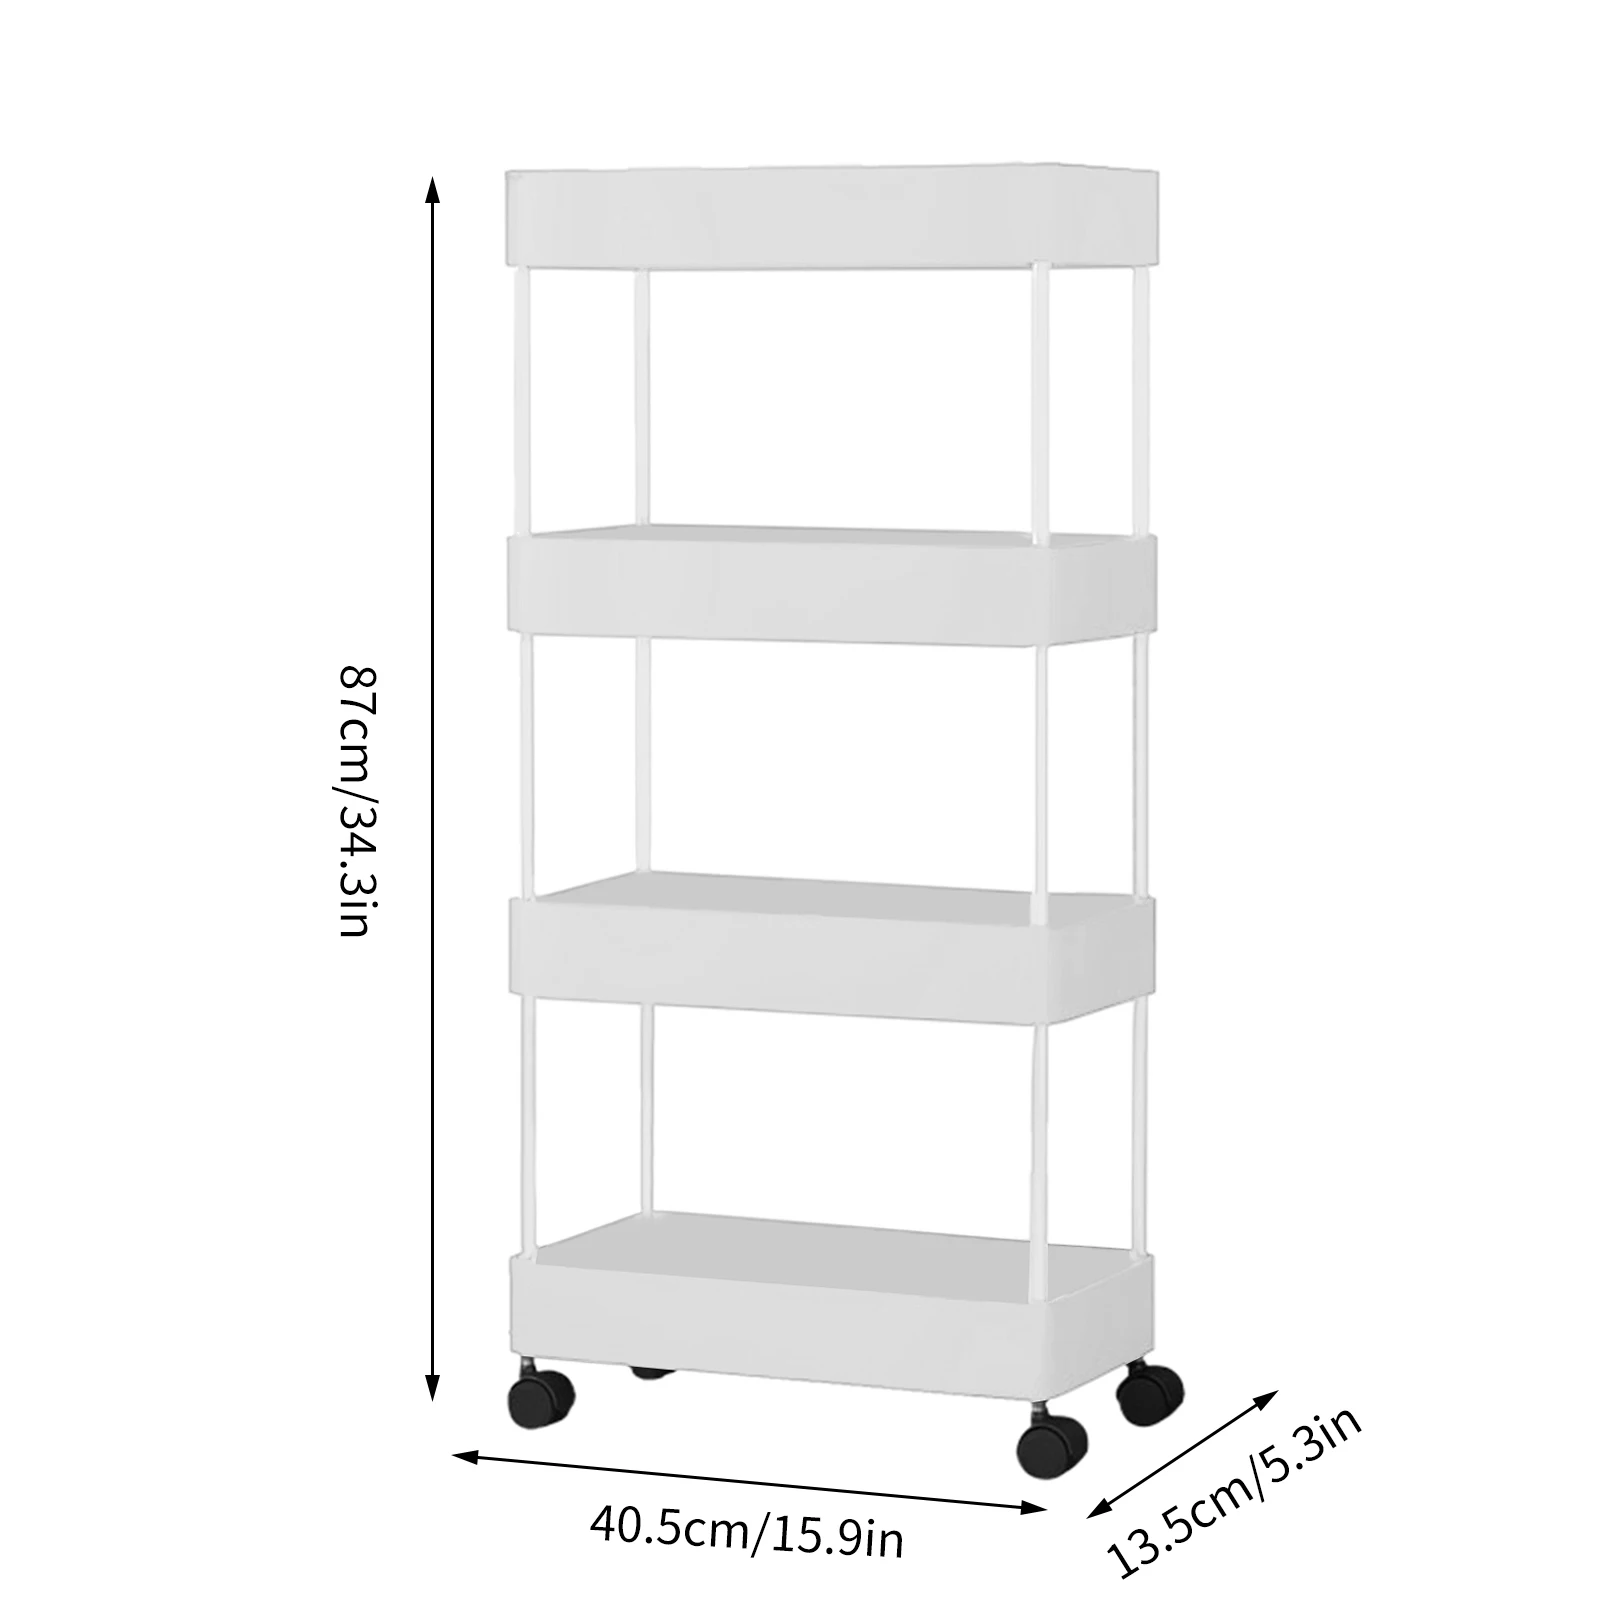 Dropship 4-Tire Rolling Cart Organizer Unit With Wheels Narrow Slim Container  Storage Cabinet For Bathroom Bedroom RT to Sell Online at a Lower Price